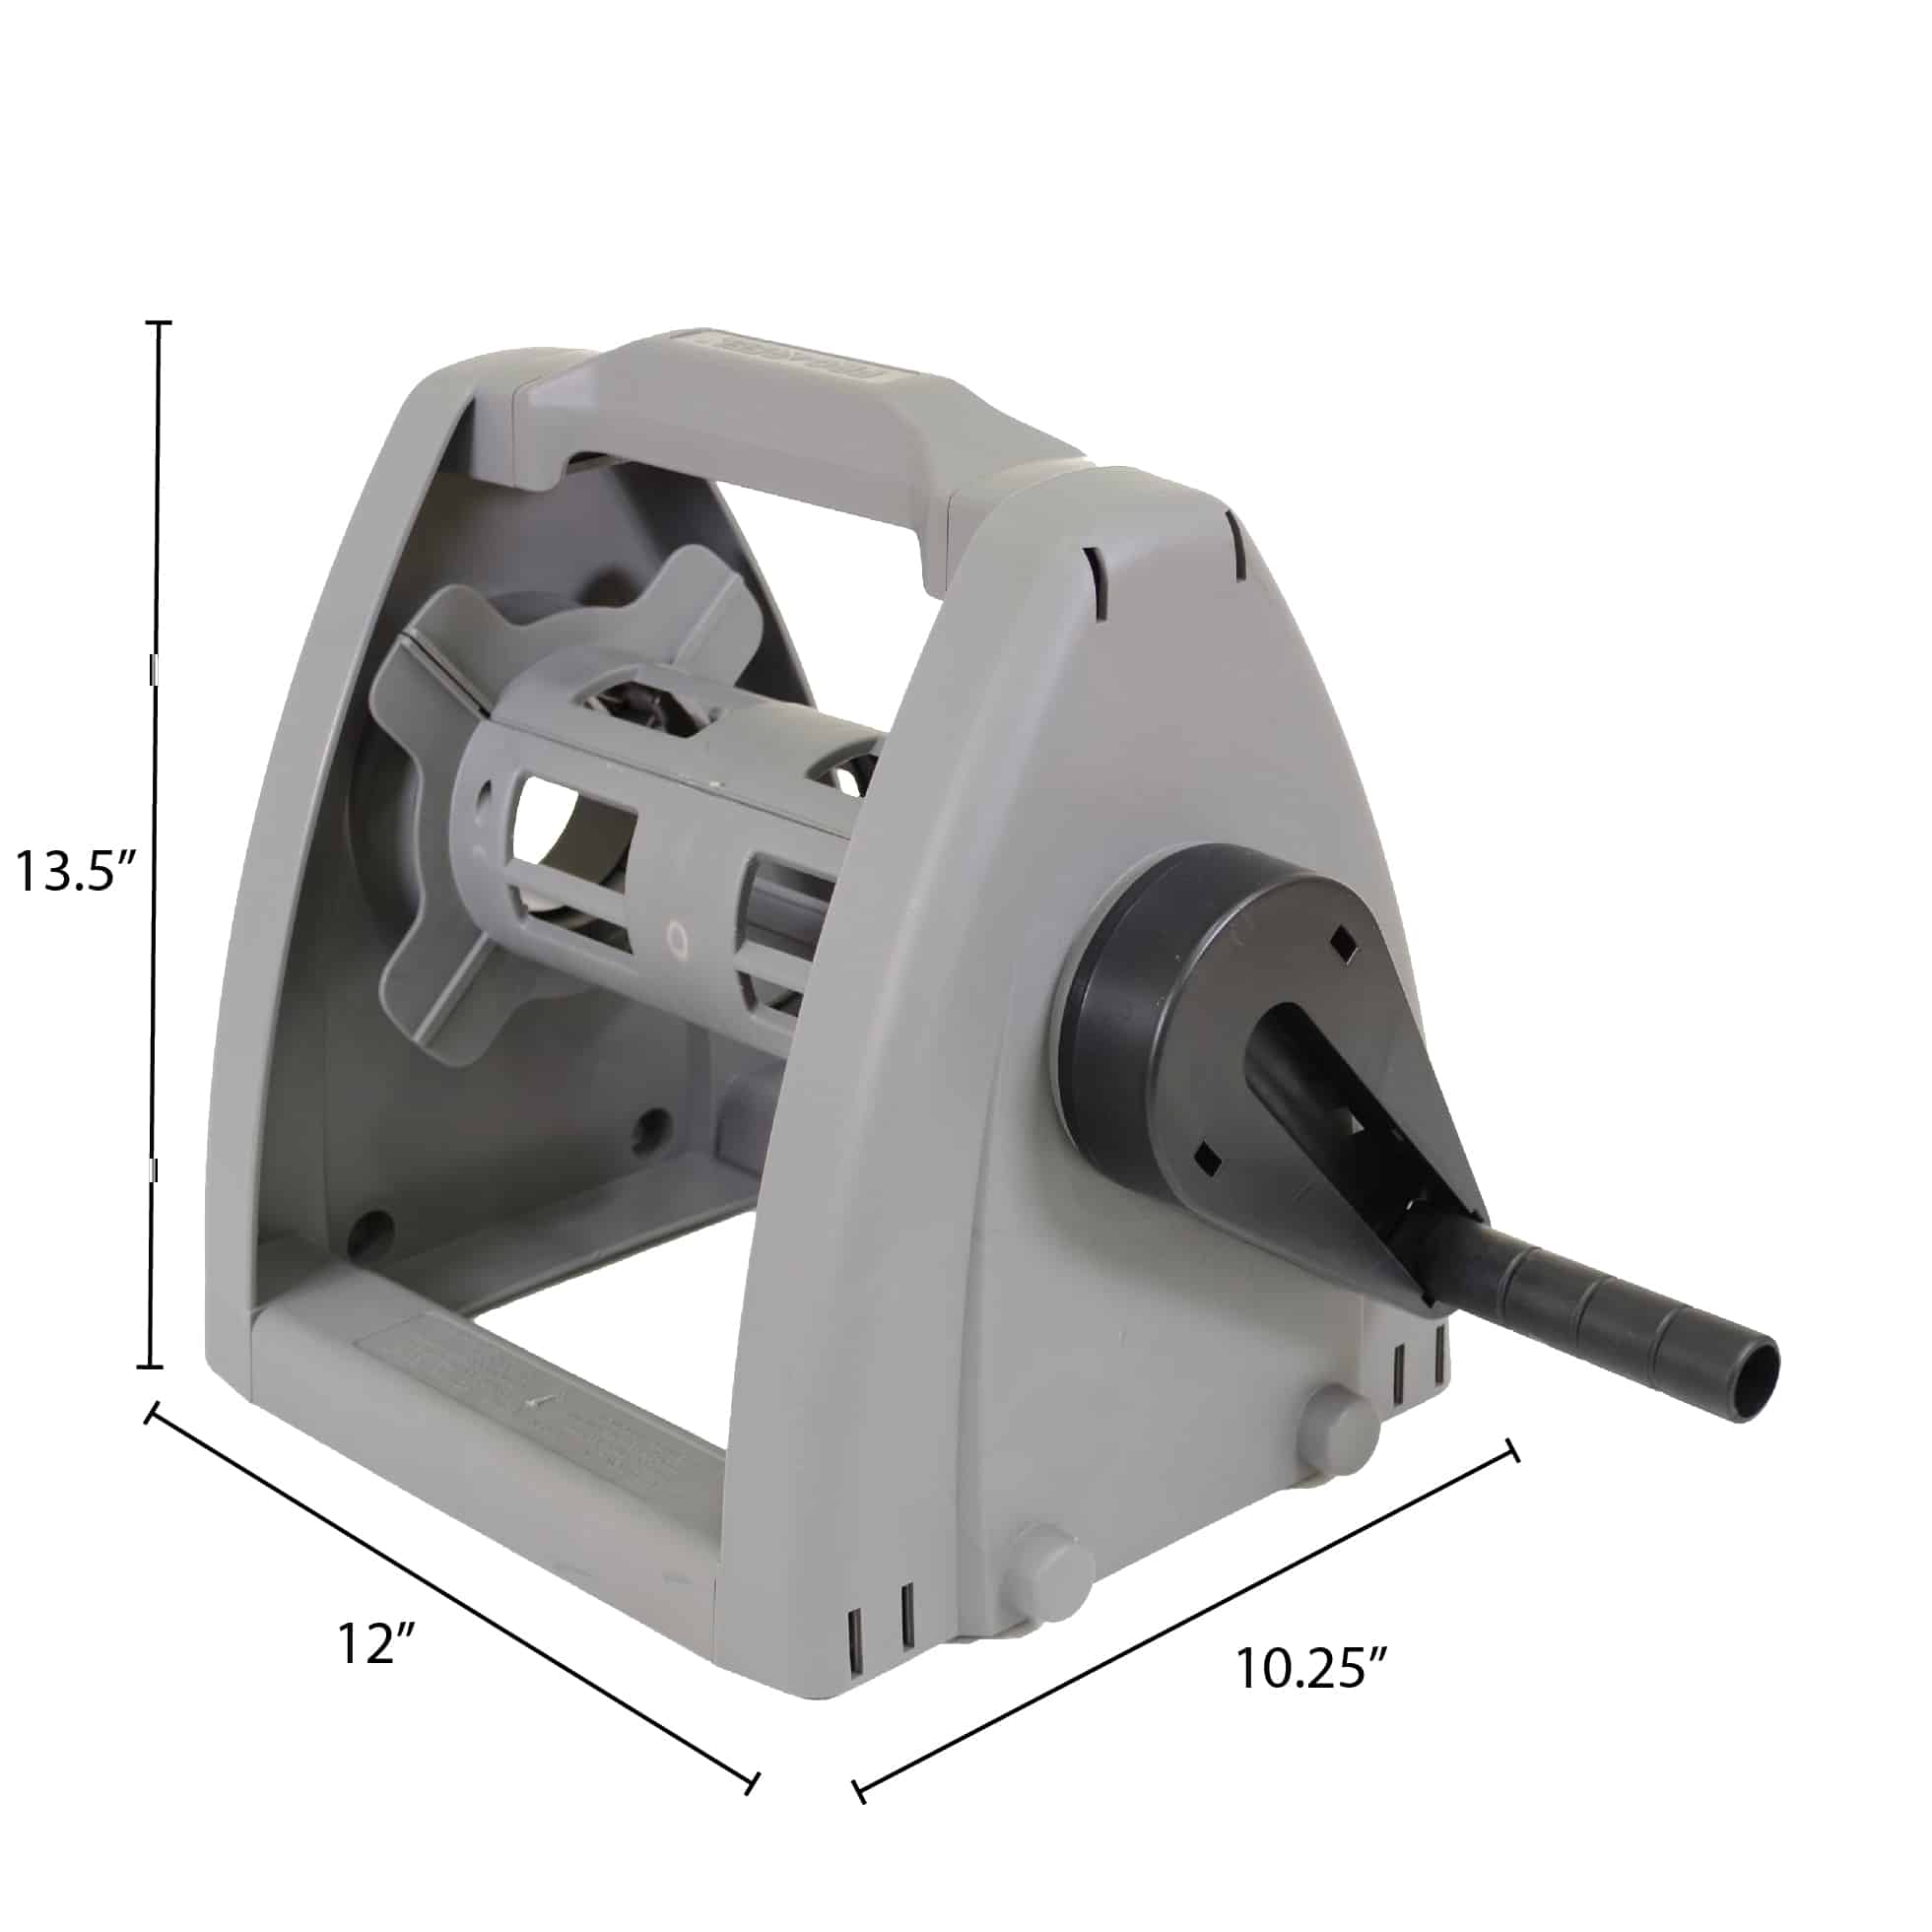 Cable Reel Holder  Wall Mount Bracket for Storing Cable Reels